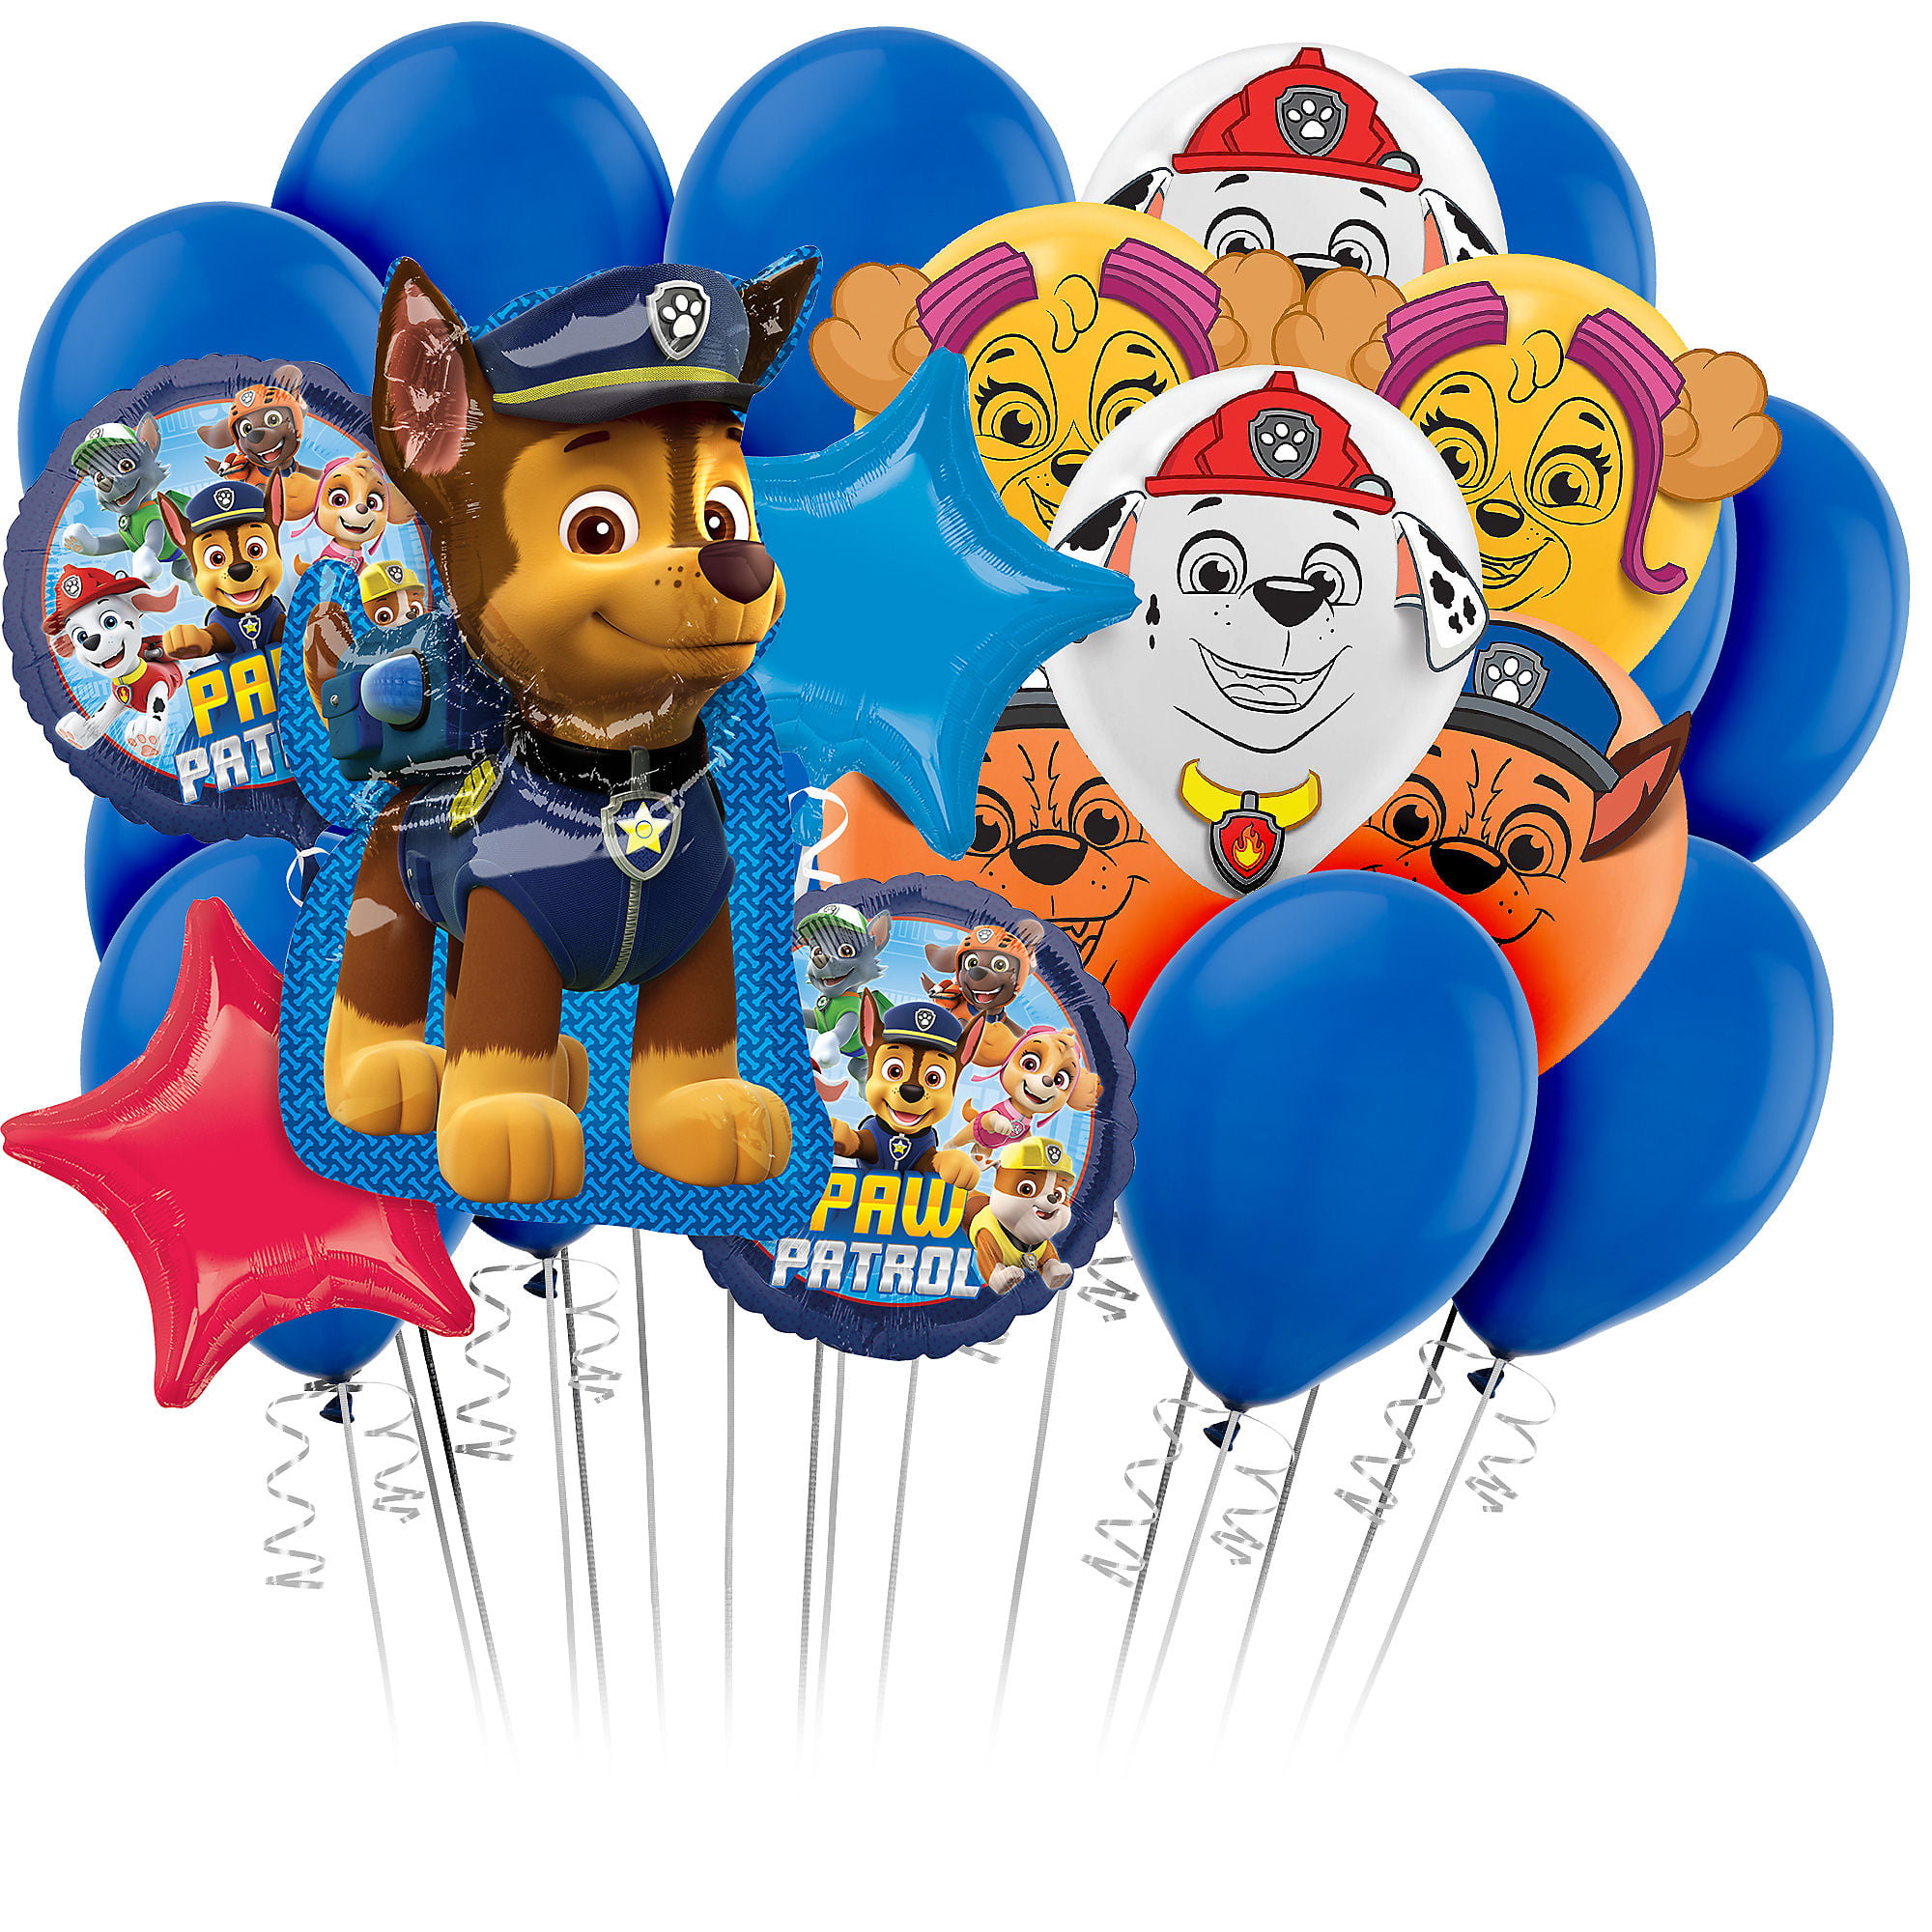 Party Paw Theme Balloon Party Supplies, Includes Ribbon, 27 Pieces -